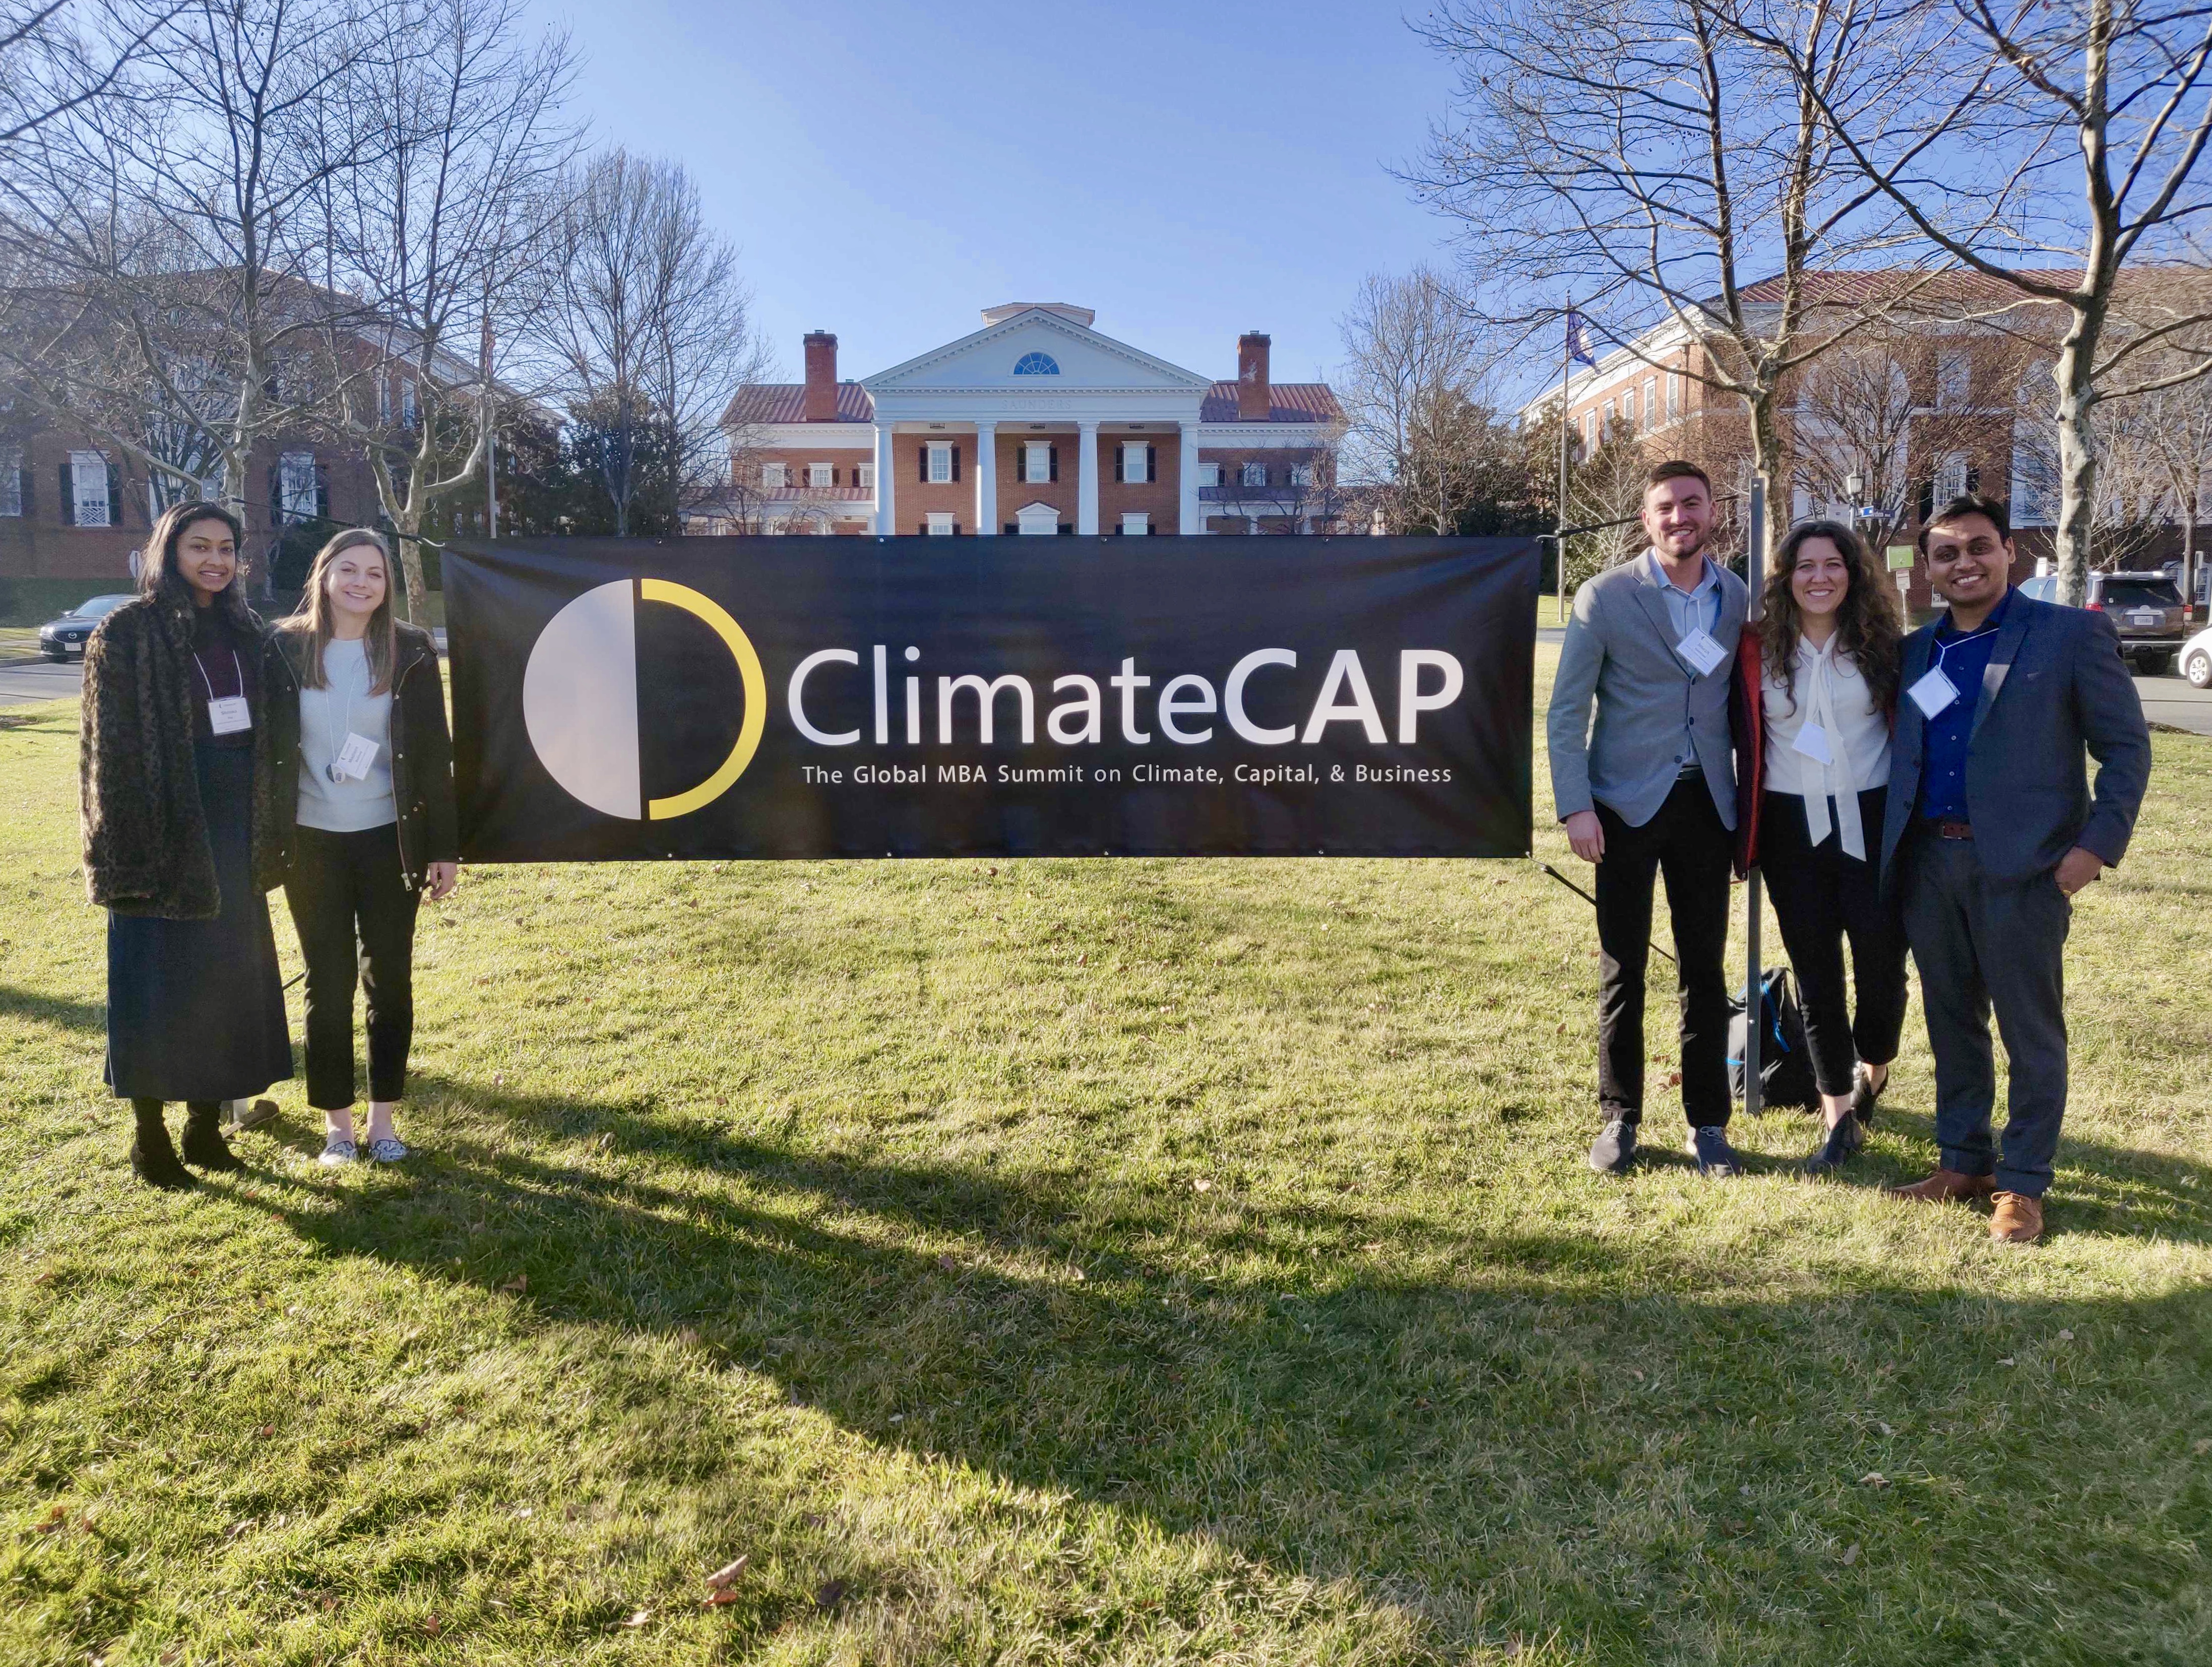 (L-R) Shrinka Roy, Maddy Bodford, Joe Carothers, Amanda Grupp, and Jaspreet Singh attend the ClimateCAP summit for MBA students.